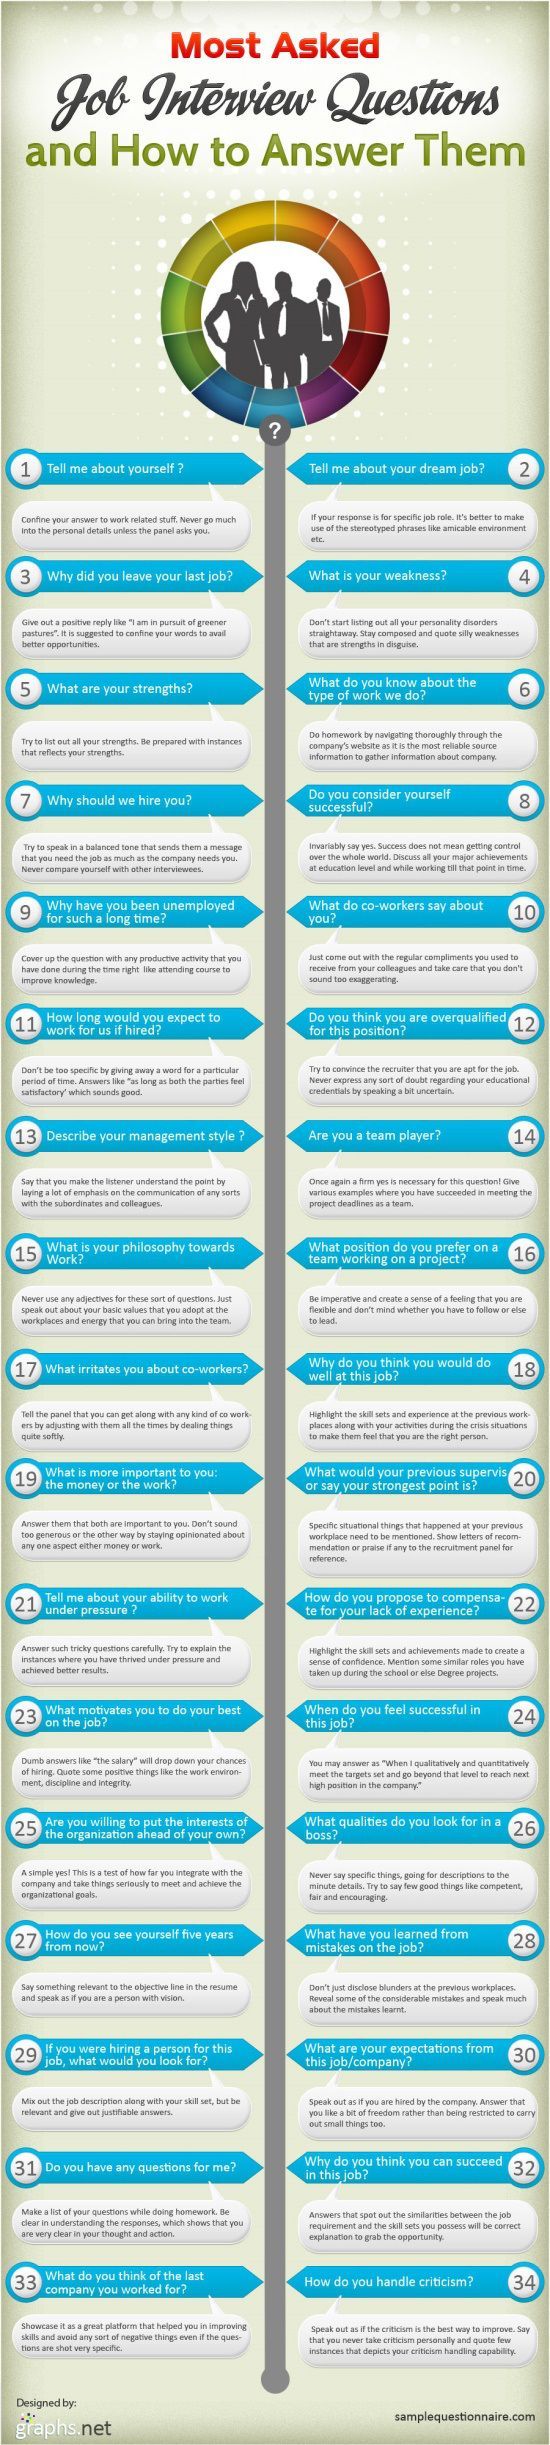 Most asked interview questions. These would be good tips if I could read them without cringing at all the bad grammar.